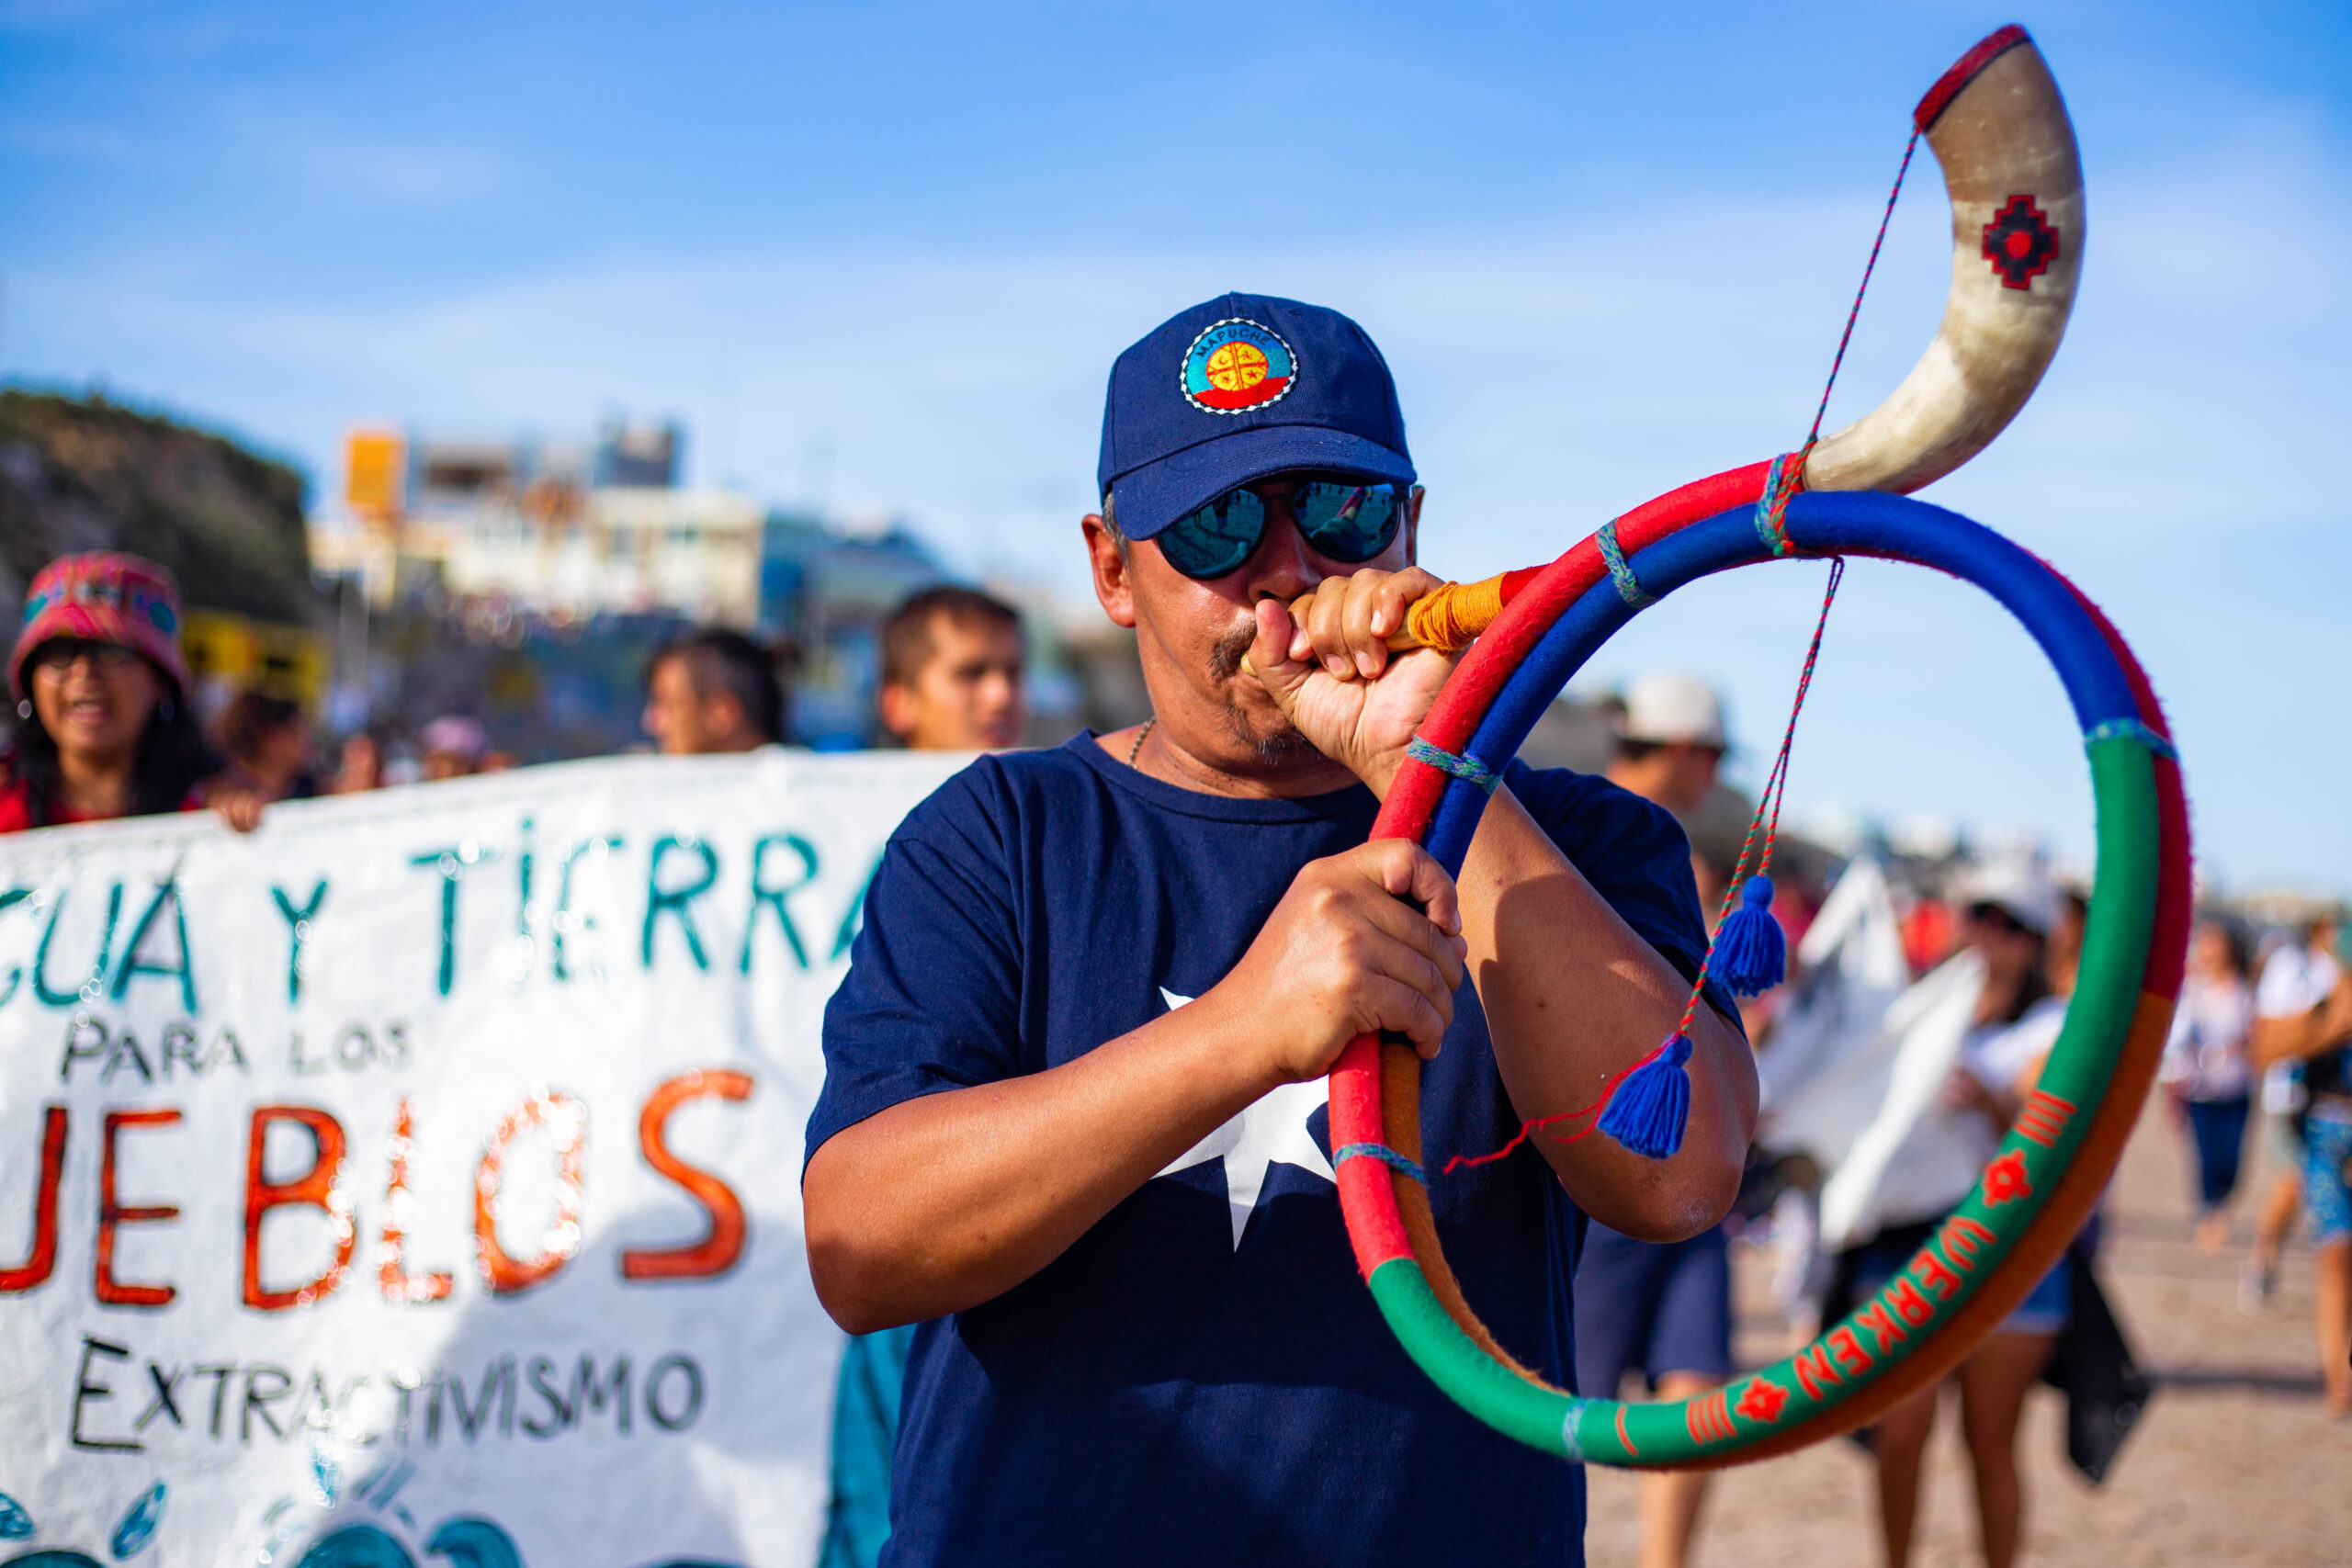 A mapuche activist blowing a horn-like instrument at a demonstration against the Vaca Muerta Sur LNG terminal. Argentina is pushing a major oil and gas exporting terminal